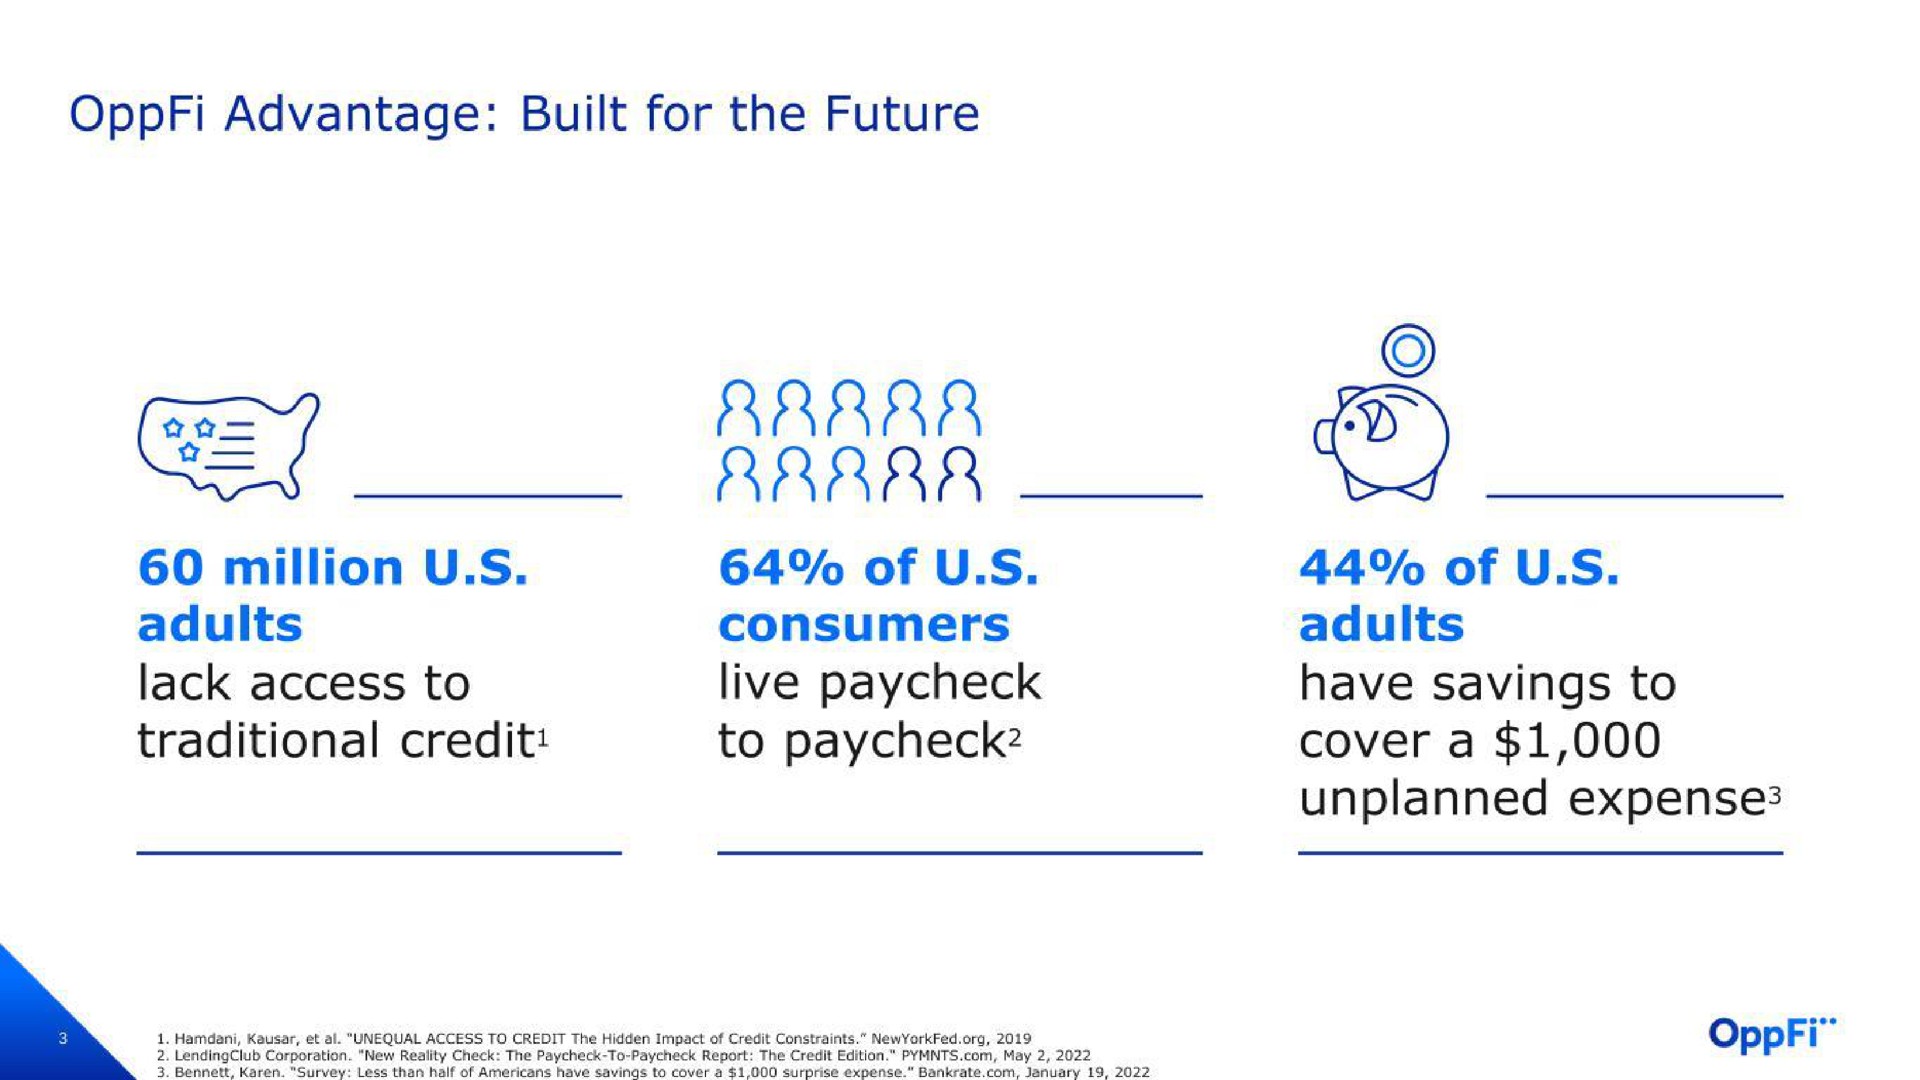 advantage built for the future million adults lack access to traditional credit of consumers live to be of adults have savings to cover a unplanned expense | OppFi